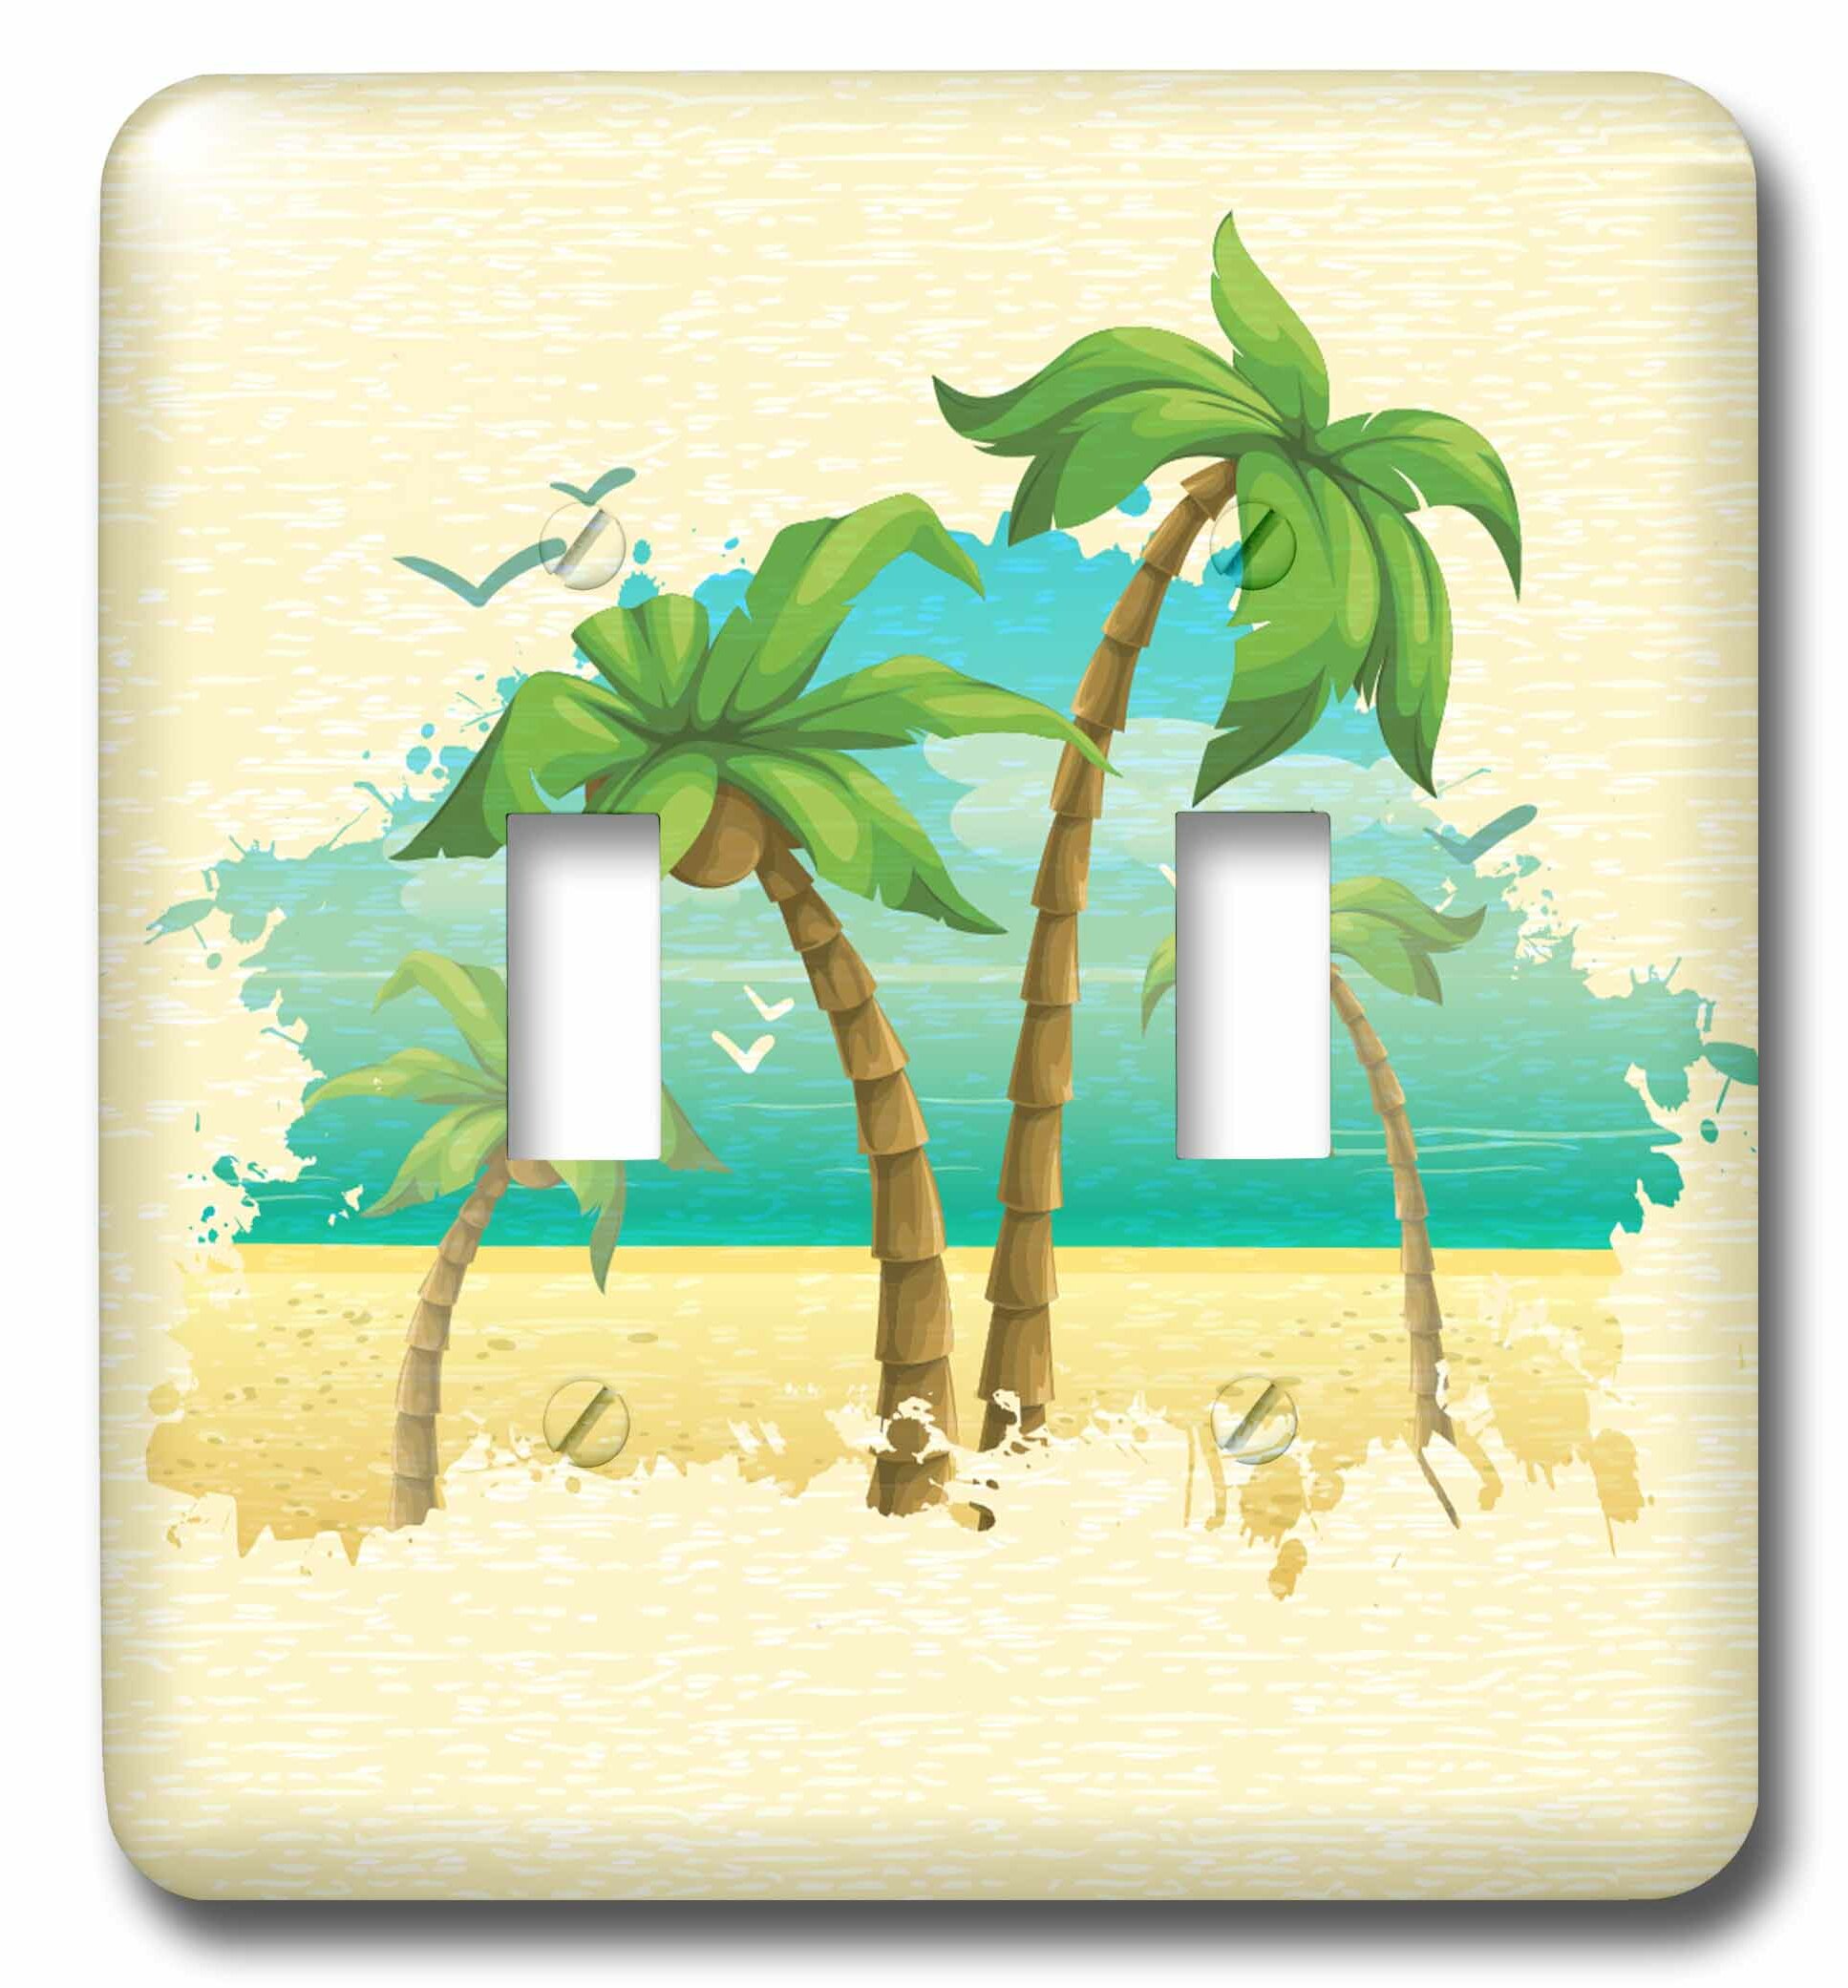 3dRose LSP_235727_1 Cute Summer Design with an Aqua Camper and Palm Tree On Green Single Toggle Switch 